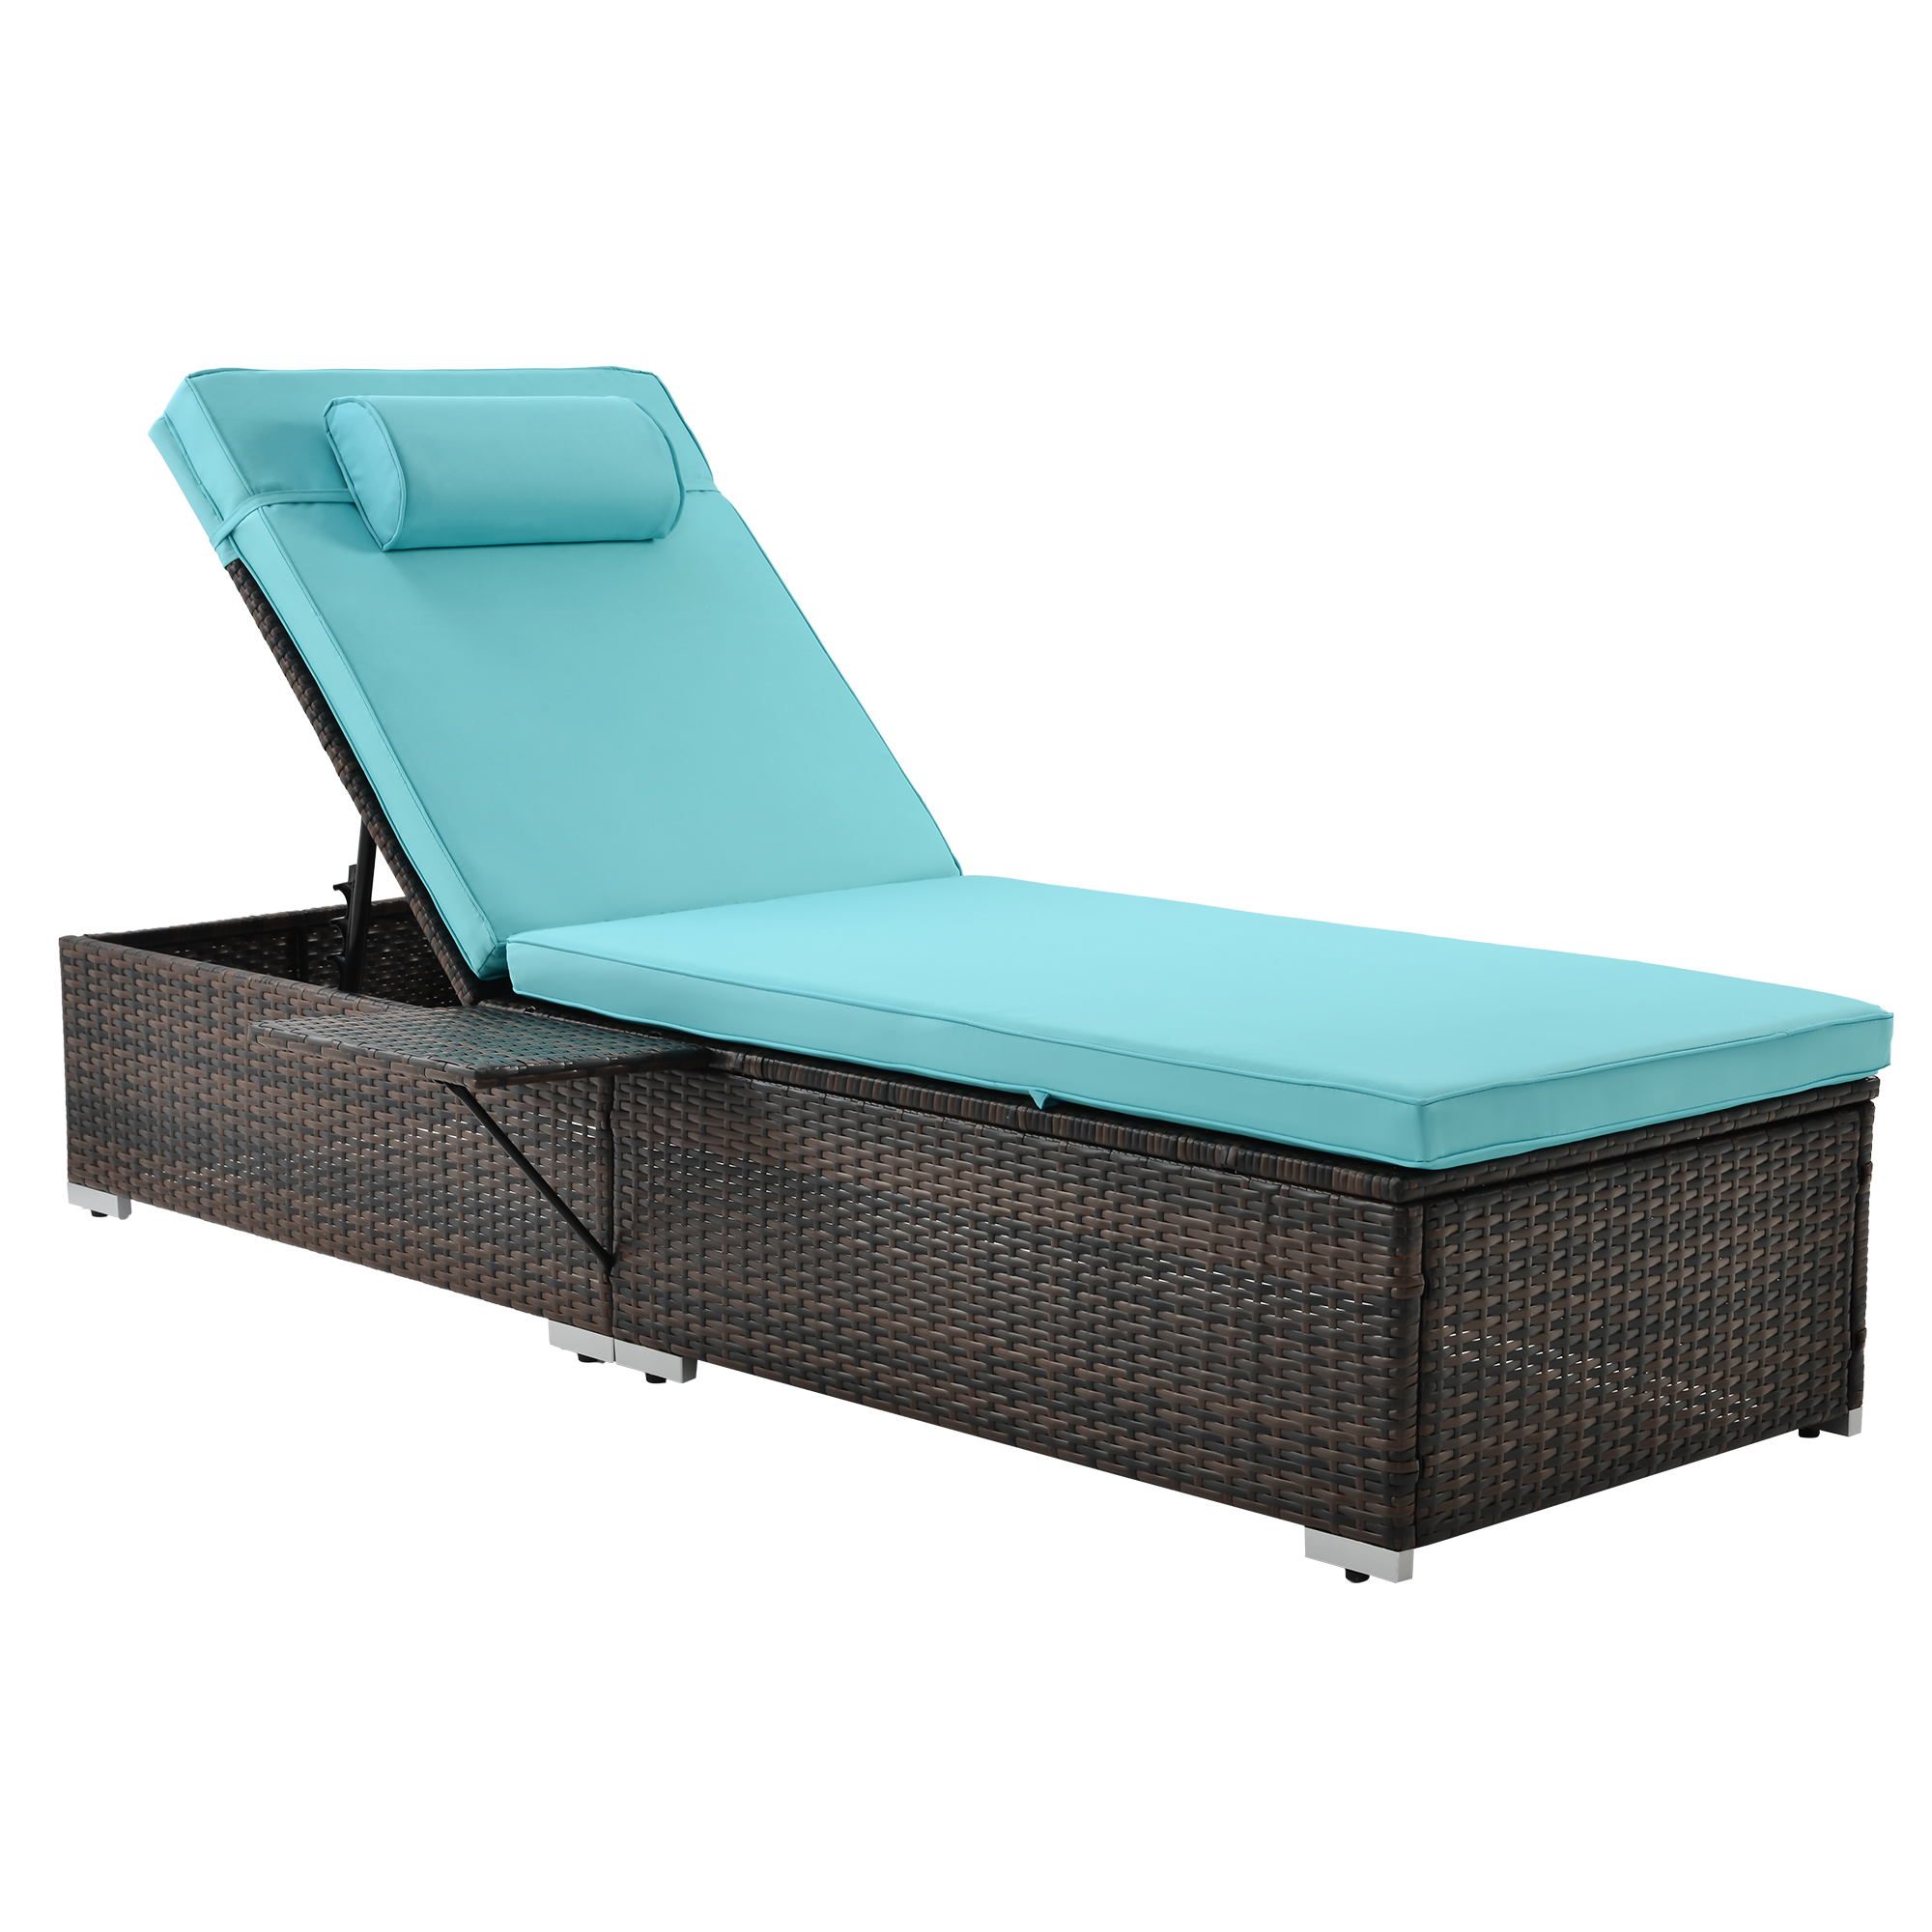 ENYOPRO 2 Piece Outdoor Patio Chaise Lounge, PE Wicker Lounge Chairs with Adjustable Backrest Recliners and Side Table, Reclining Chair Furniture Set with Cushion for Poolside Deck Patio Garden, K2695 - image 4 of 11